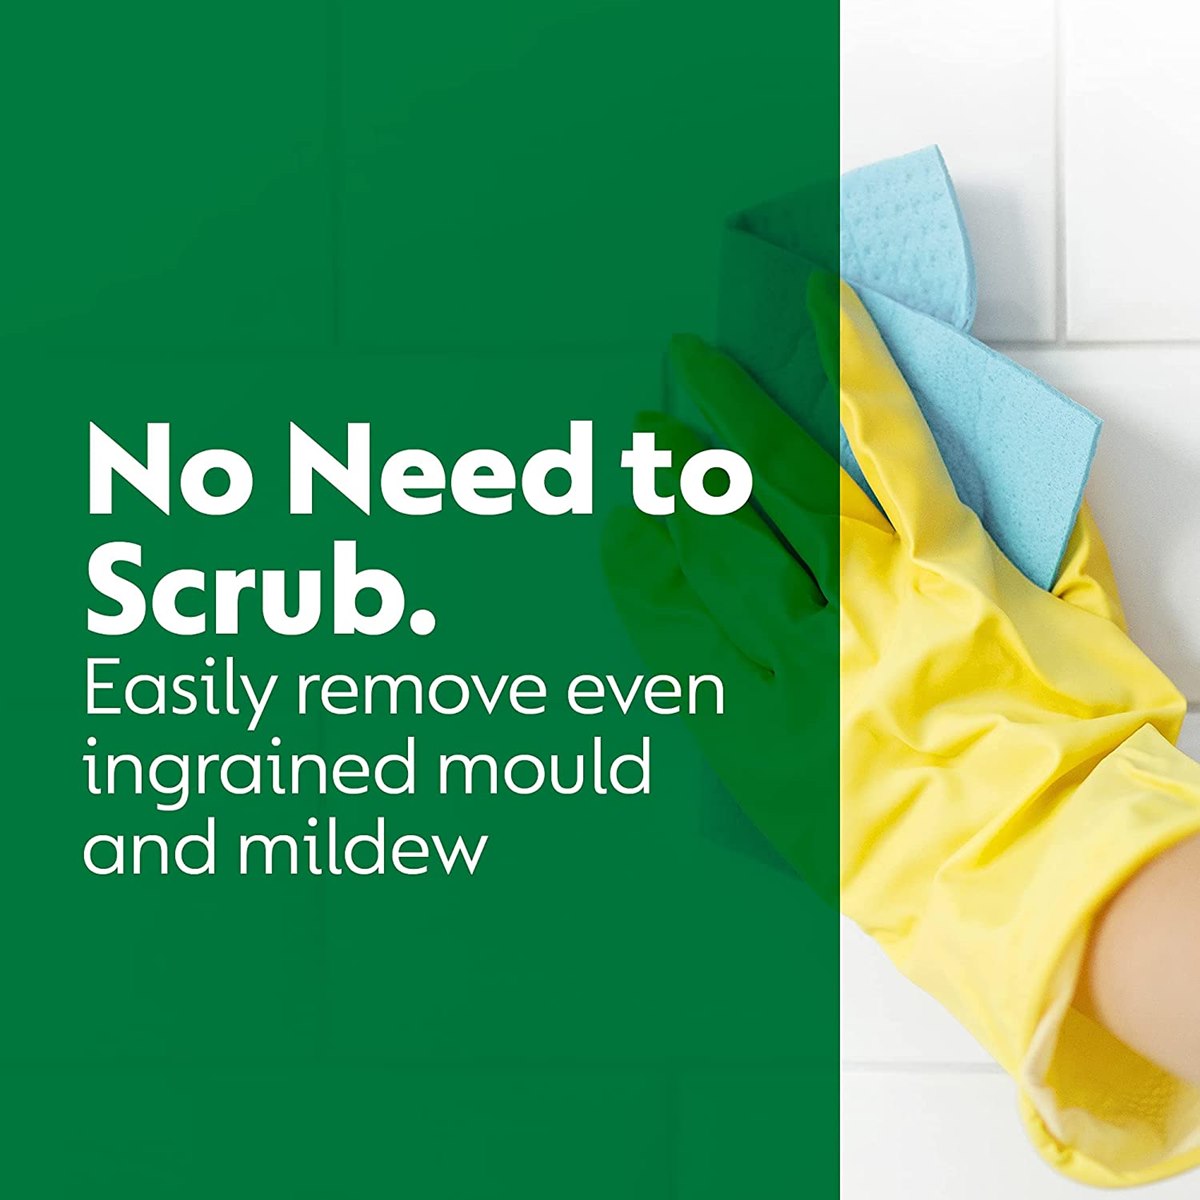 Removing Mould without Scrubbing